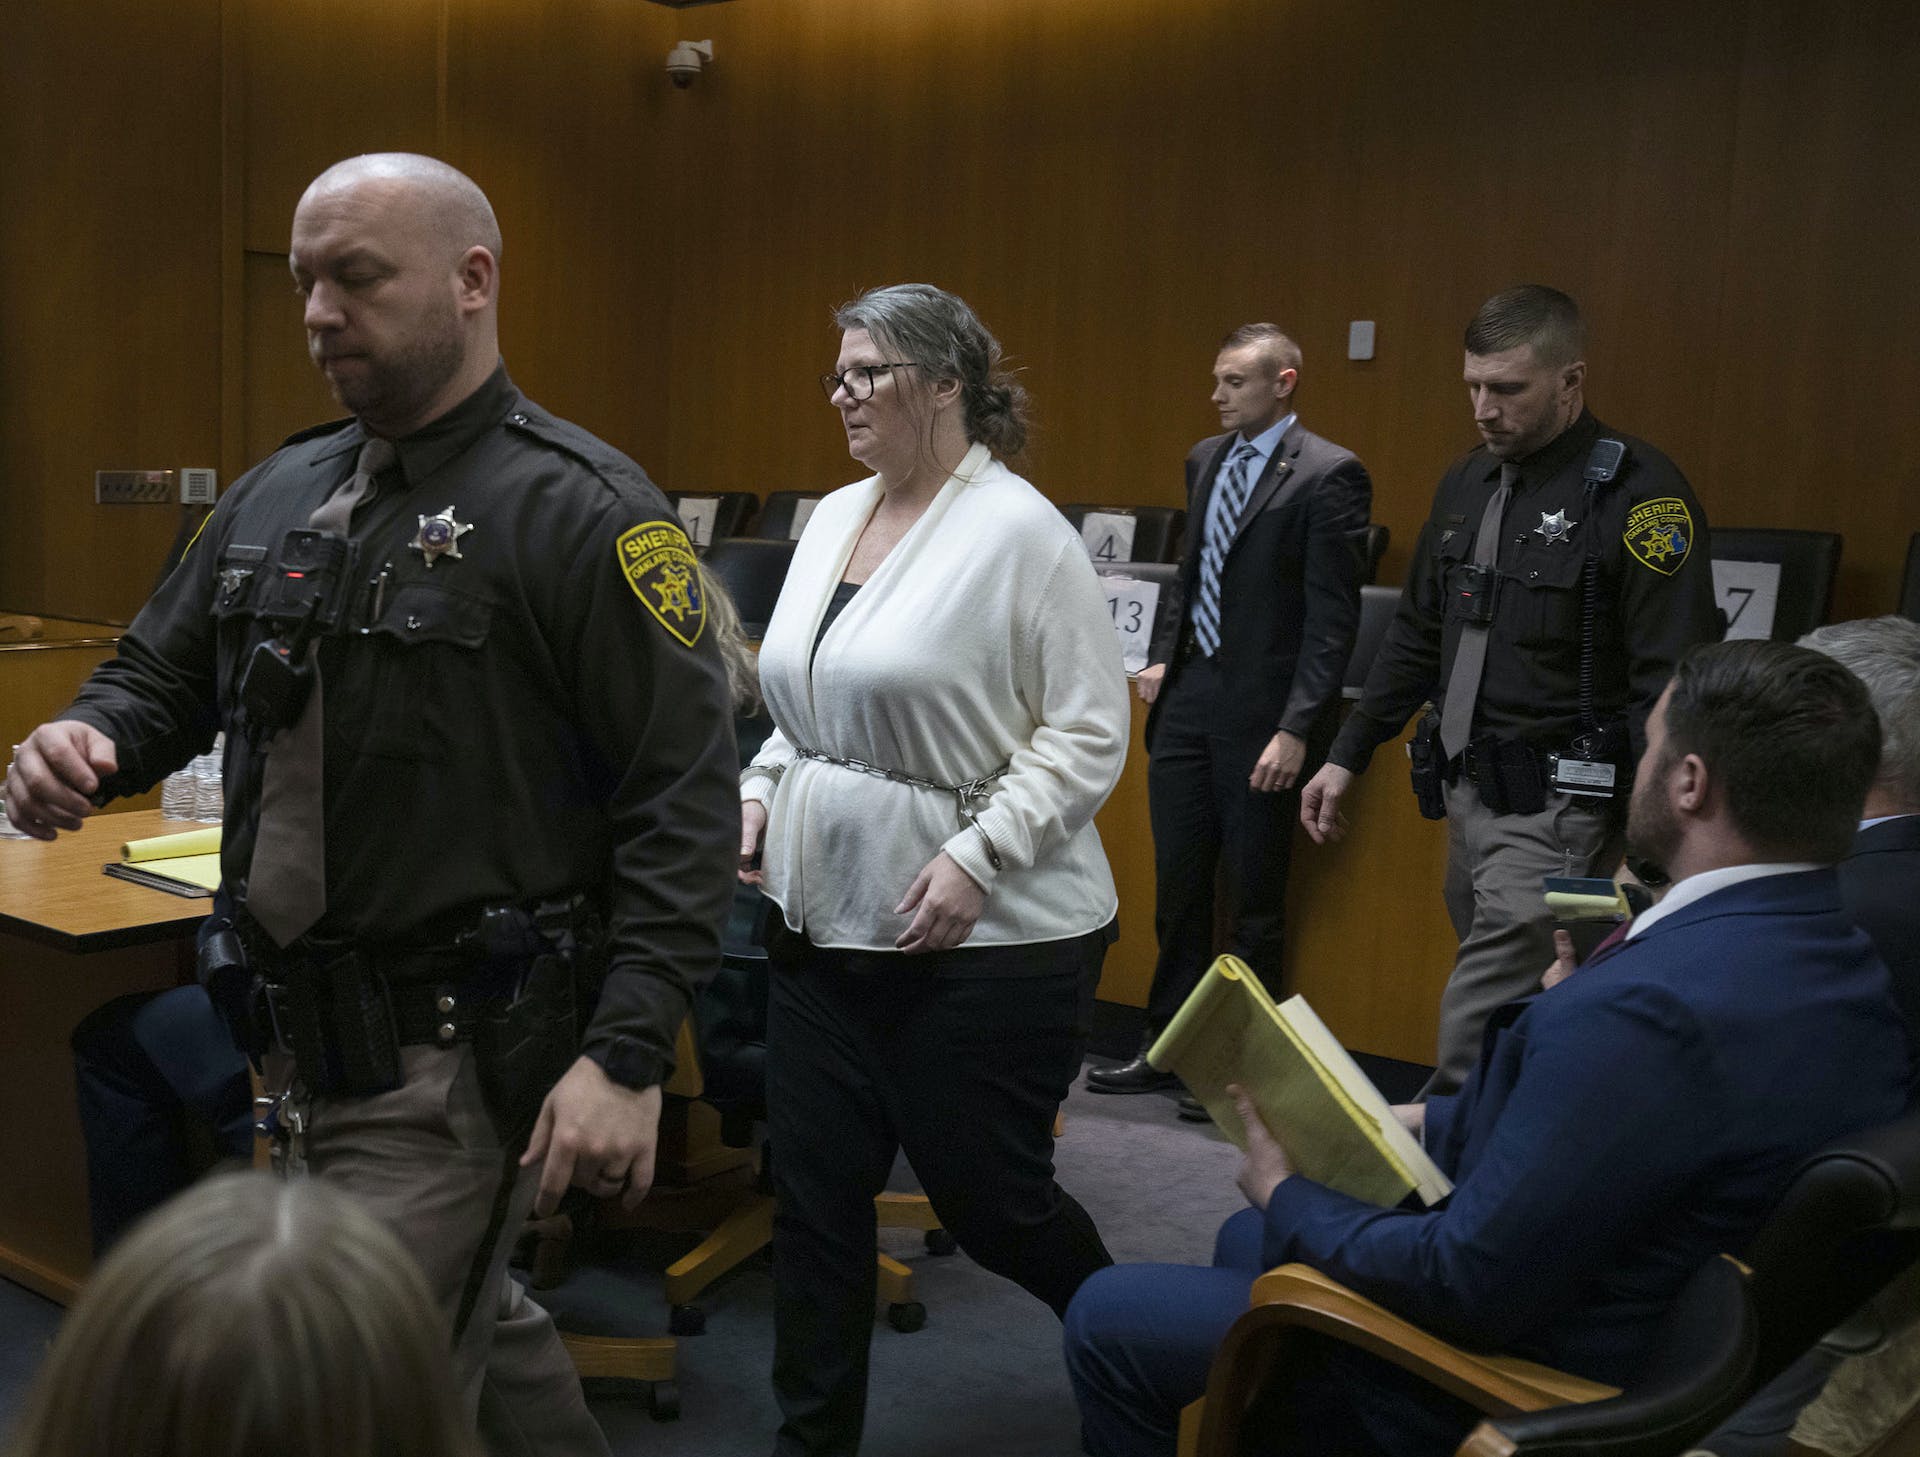 Michigan mother convicted of manslaughter for school shootings by her son – after buying him a gun and letting him keep it unsecured